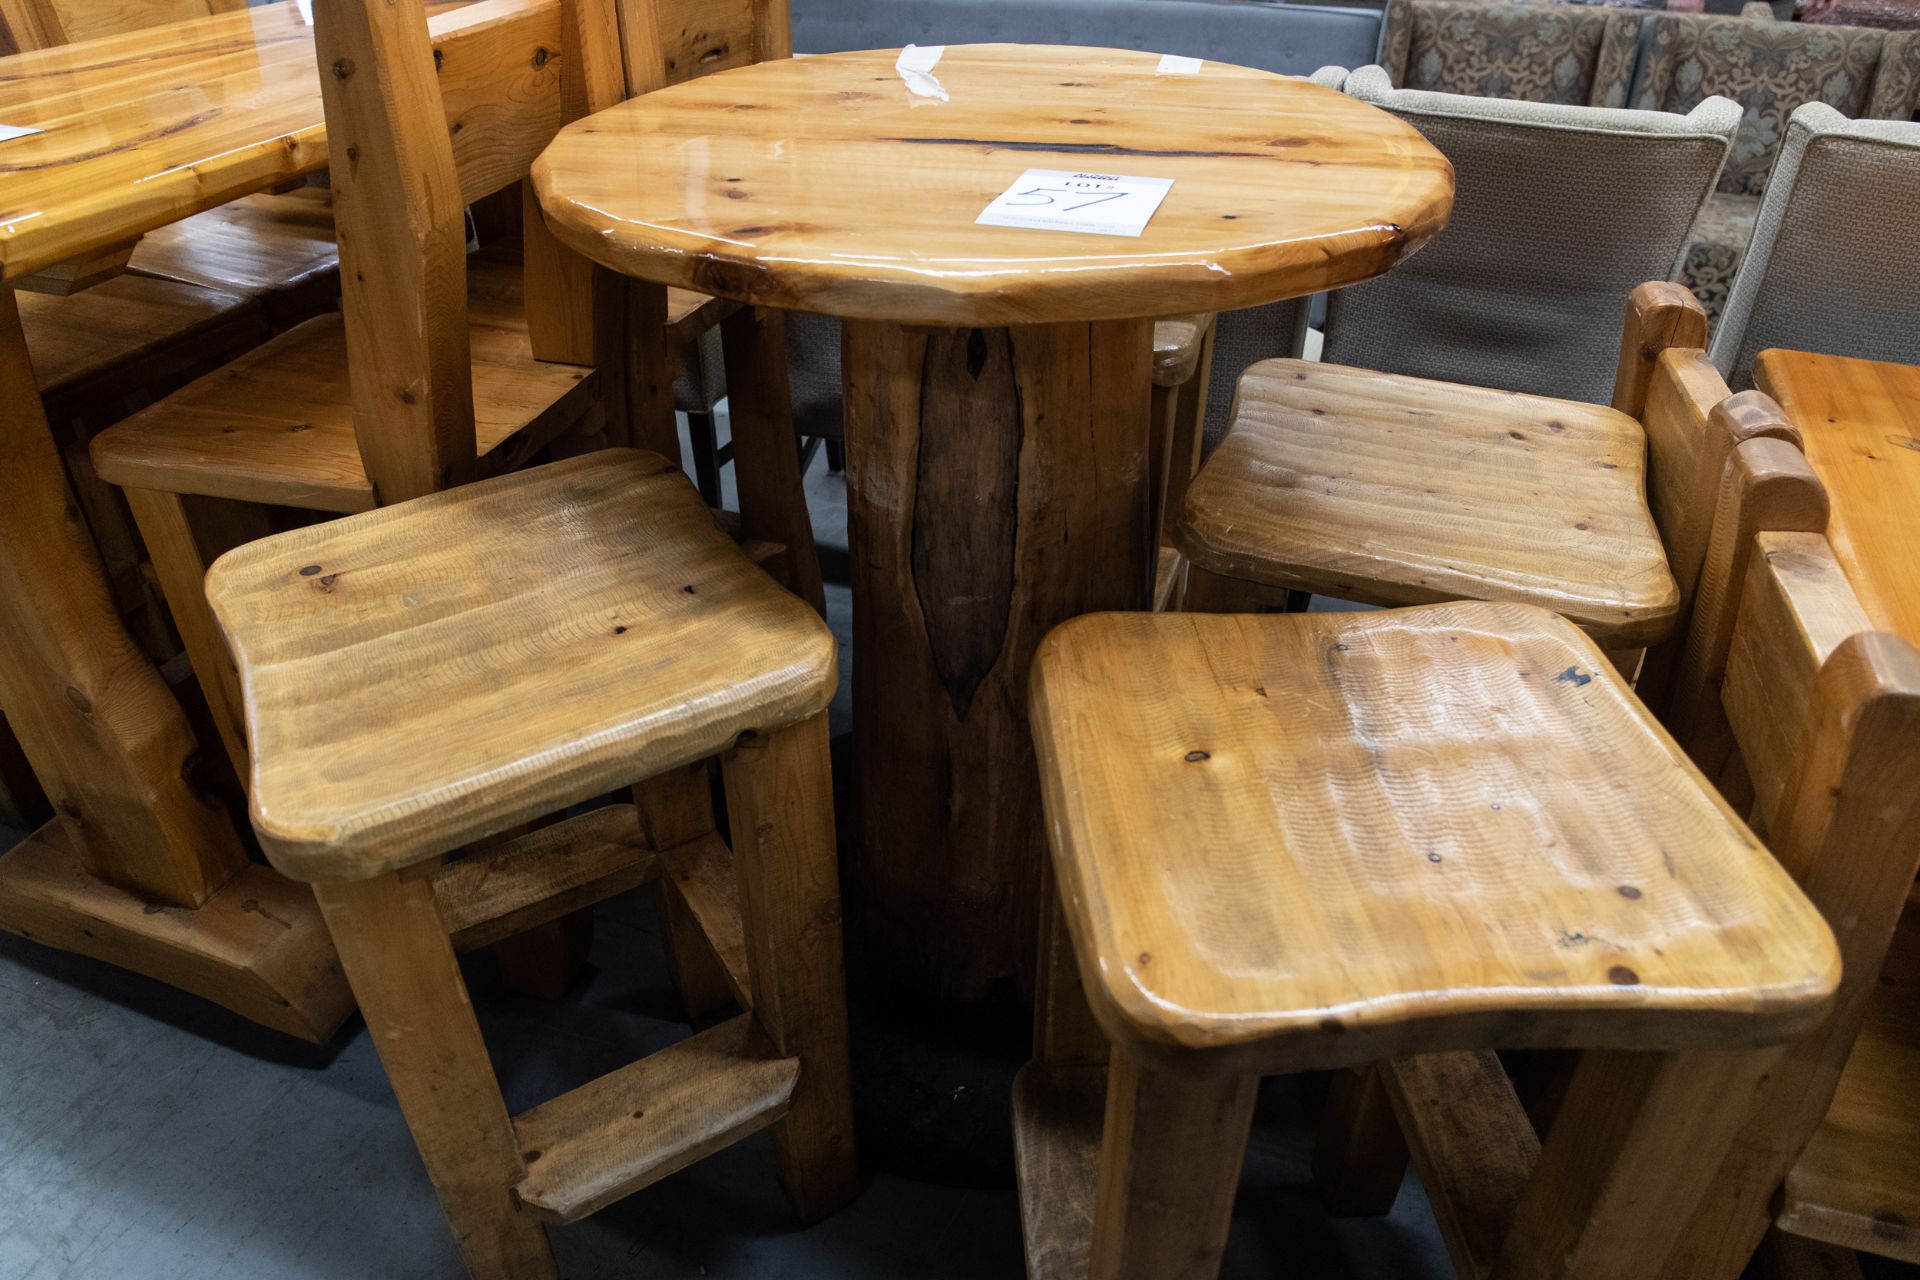 ROUND WHIITE PINE HIGH TOP PUB TABLE (TOP IS CRACKED) WITH 4 STOOLS - D- 34" H 42"